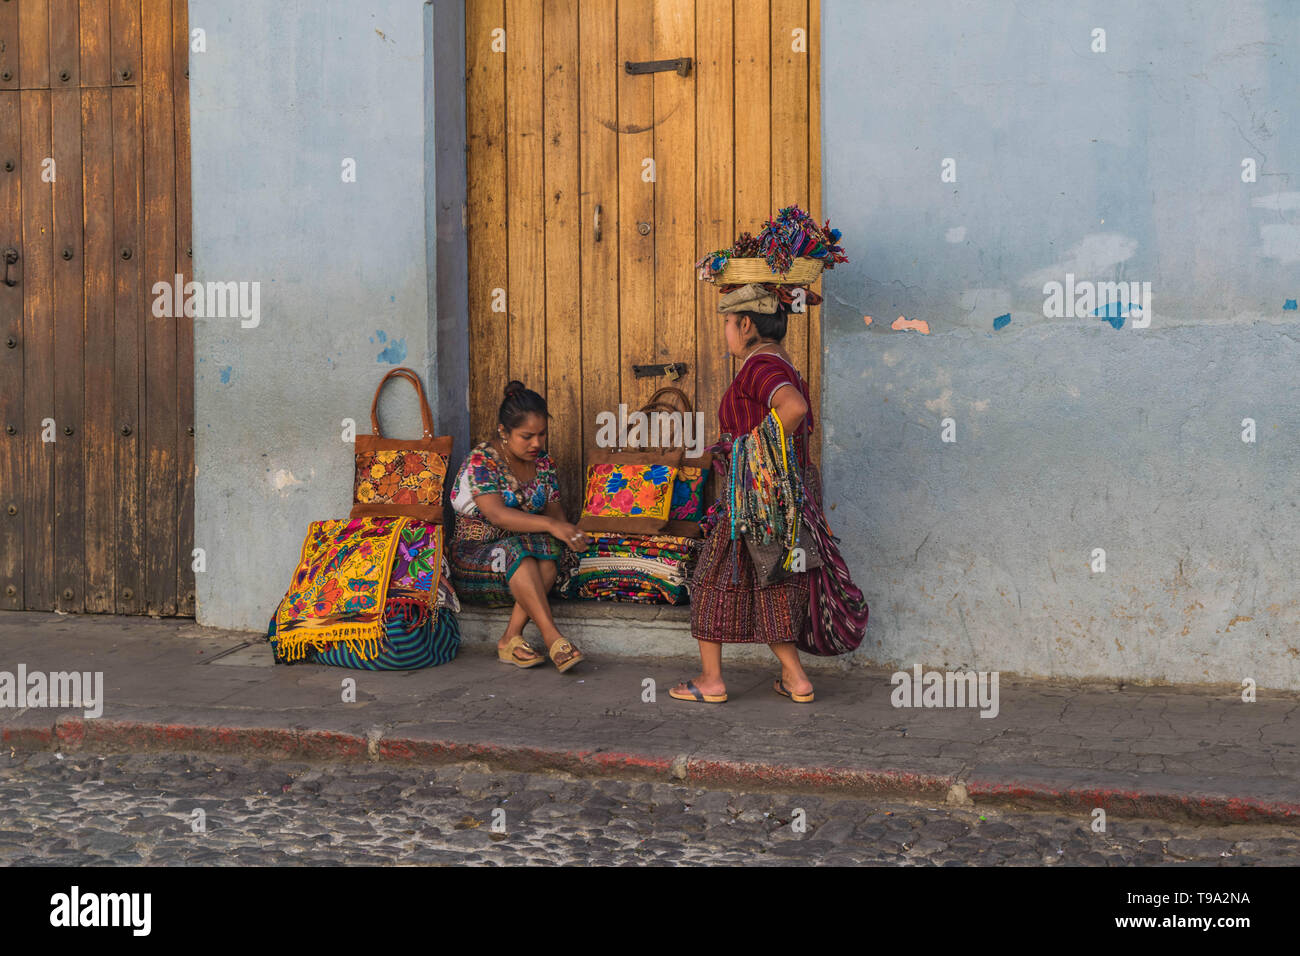 Two women street vendors in traditional clothing, one with a basket on her head, selling Guatemalan goods on a cobblestone street in Antigua Guatemala Stock Photo